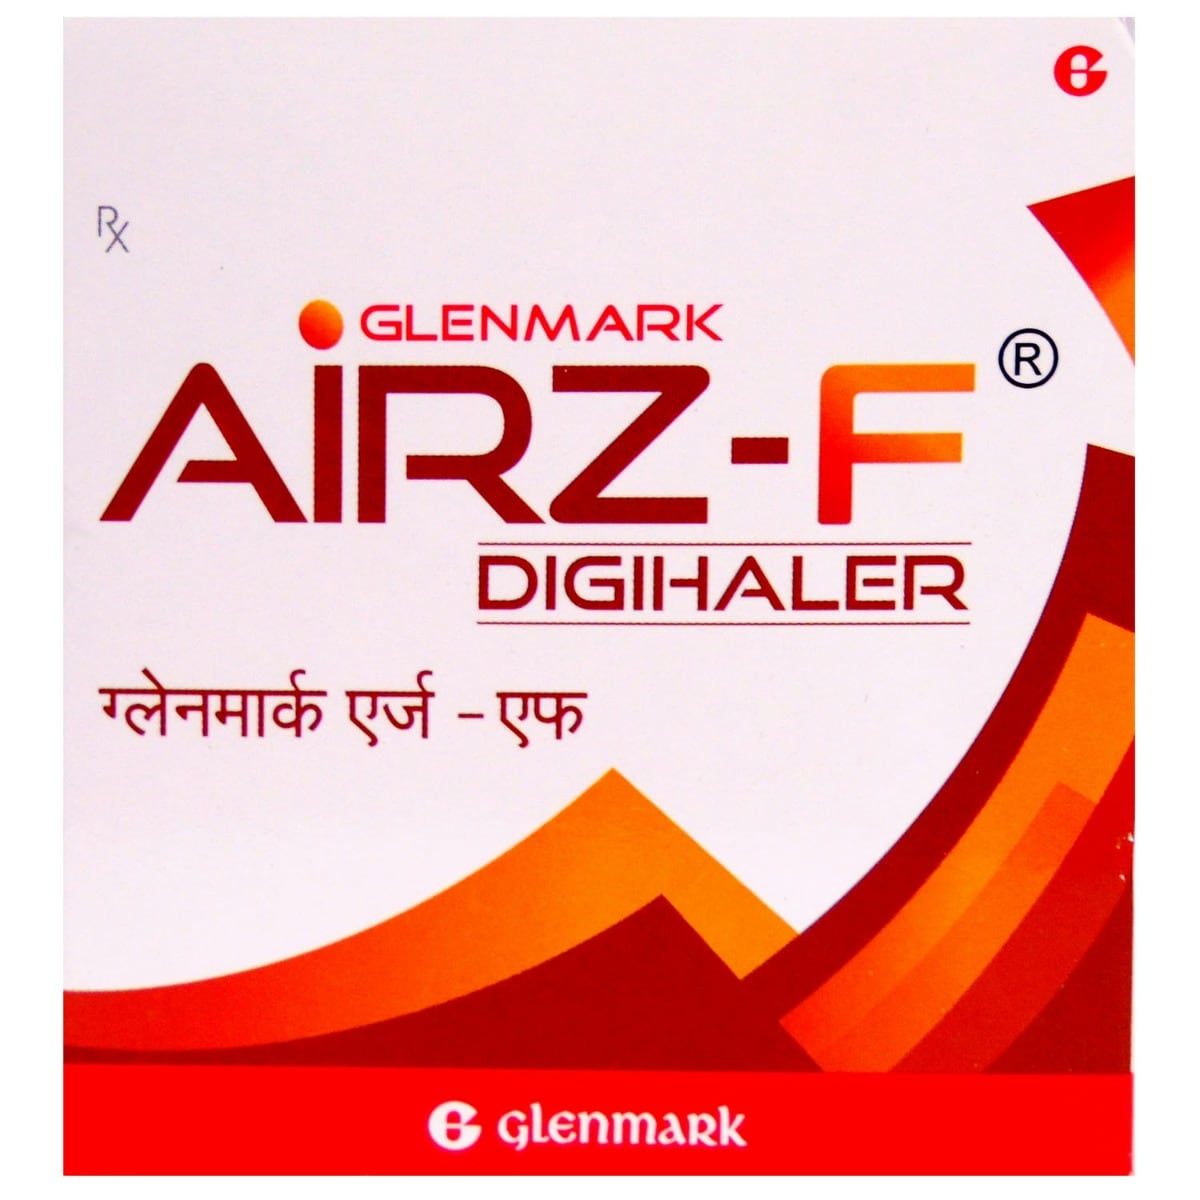 Airz-F Digihaler Price, Uses, Side Effects, Composition - Apollo ...